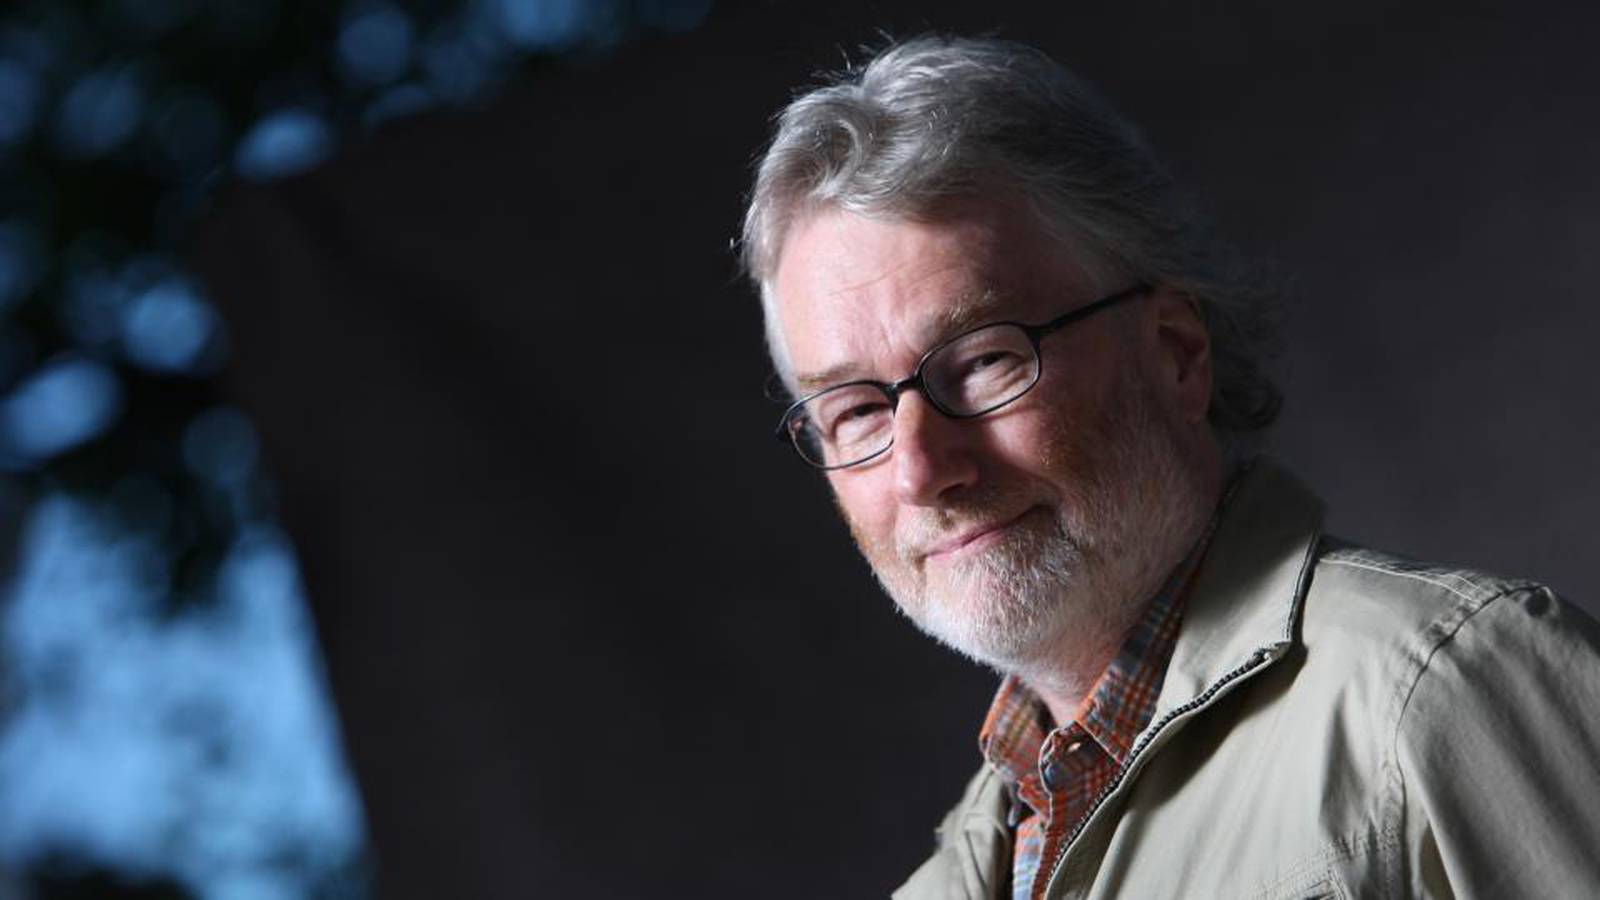 The Paris Review - Farewell, Iain Banks, and Other News - The Paris Review